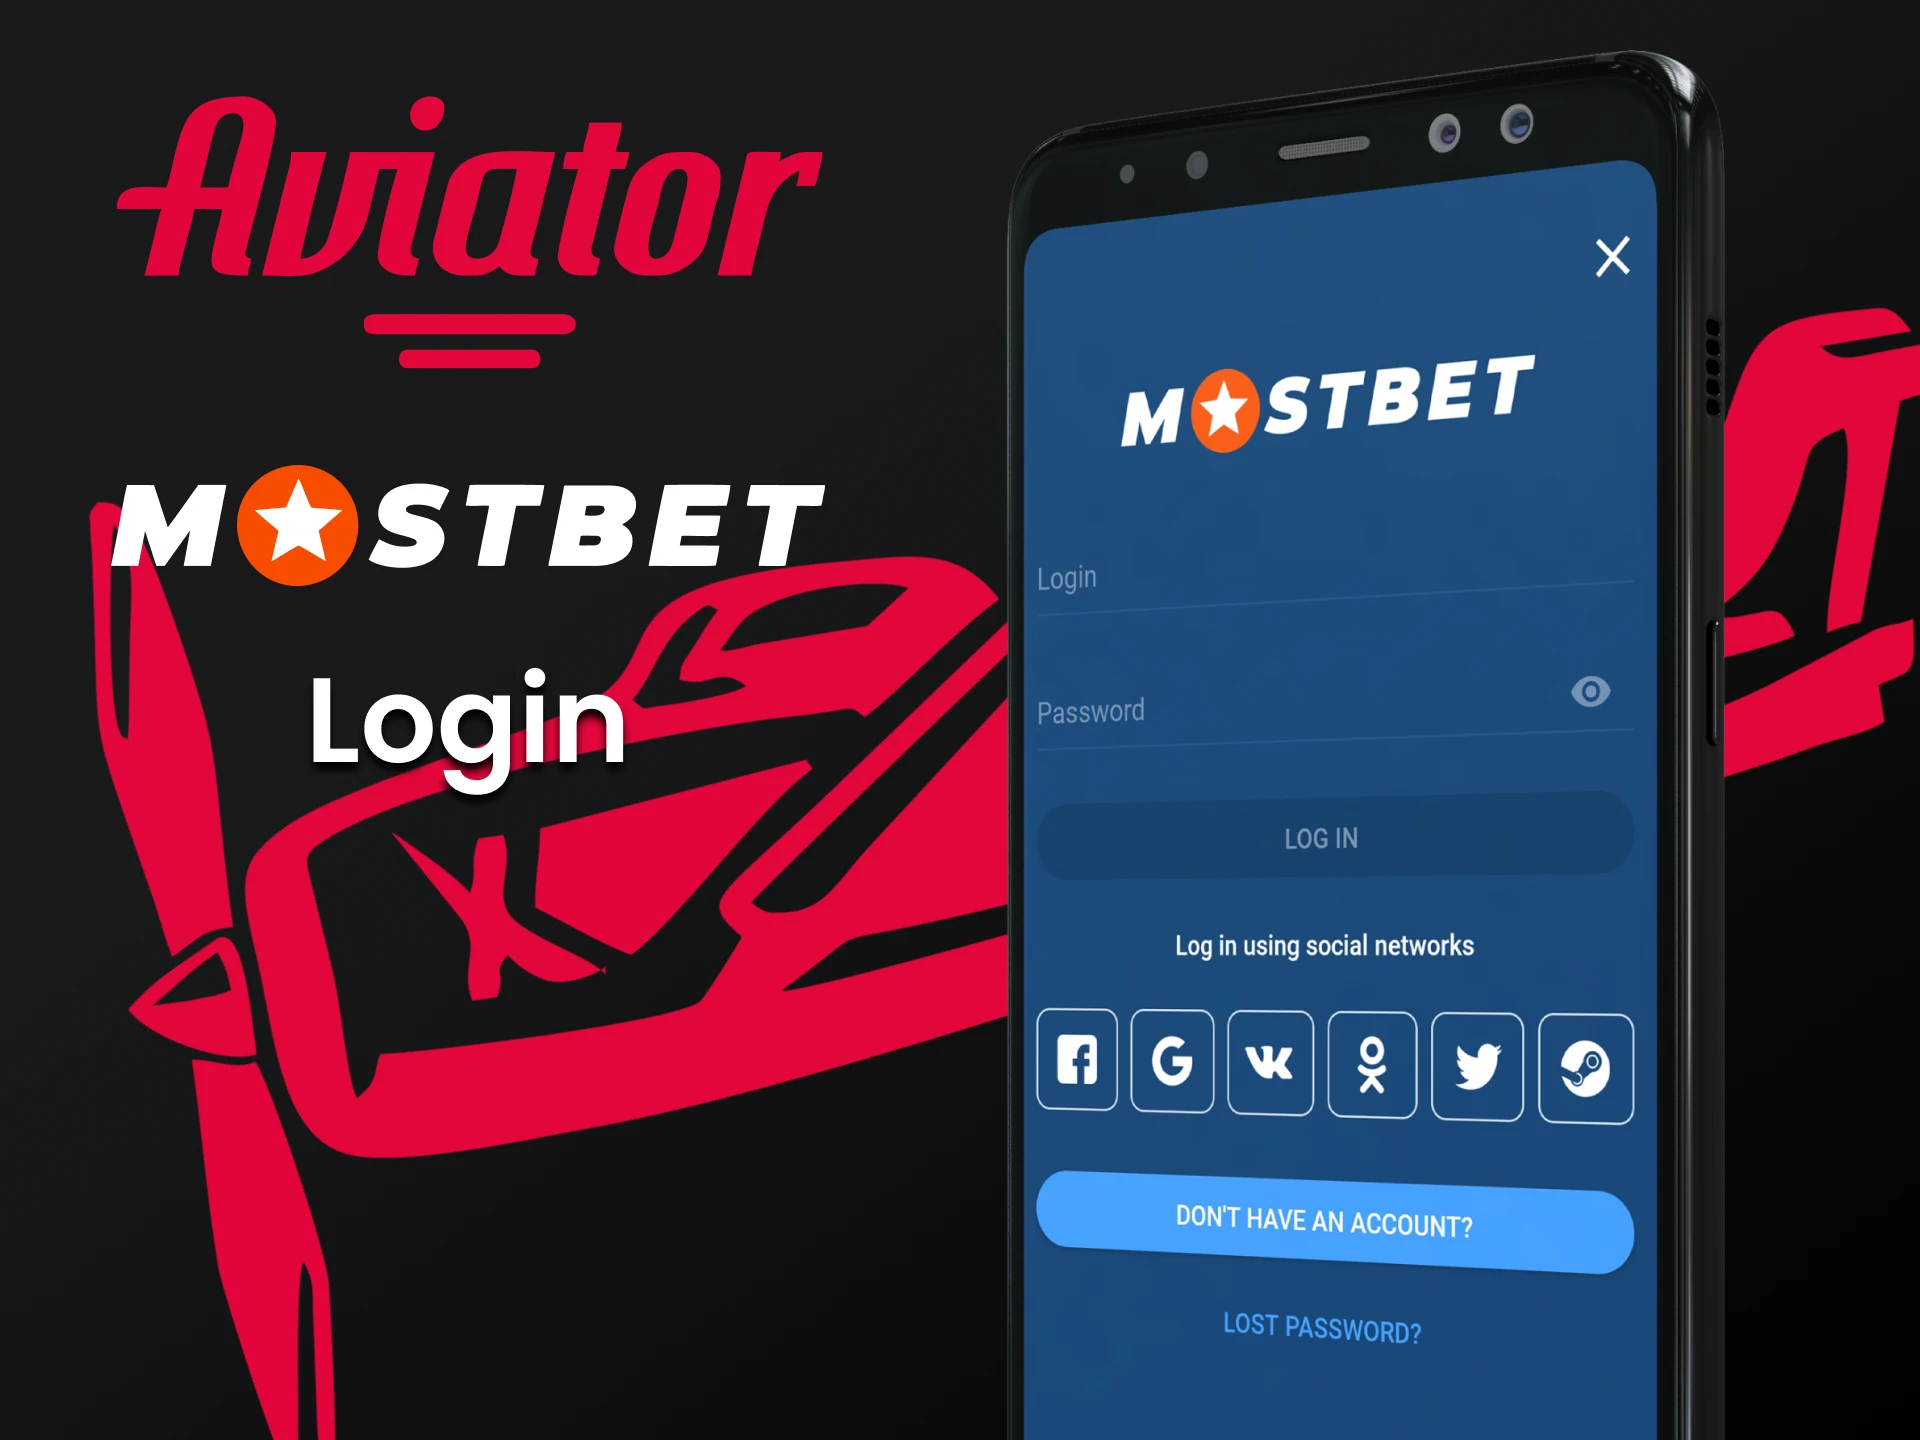 To start playing Aviator on Mostbet, log in to your account.